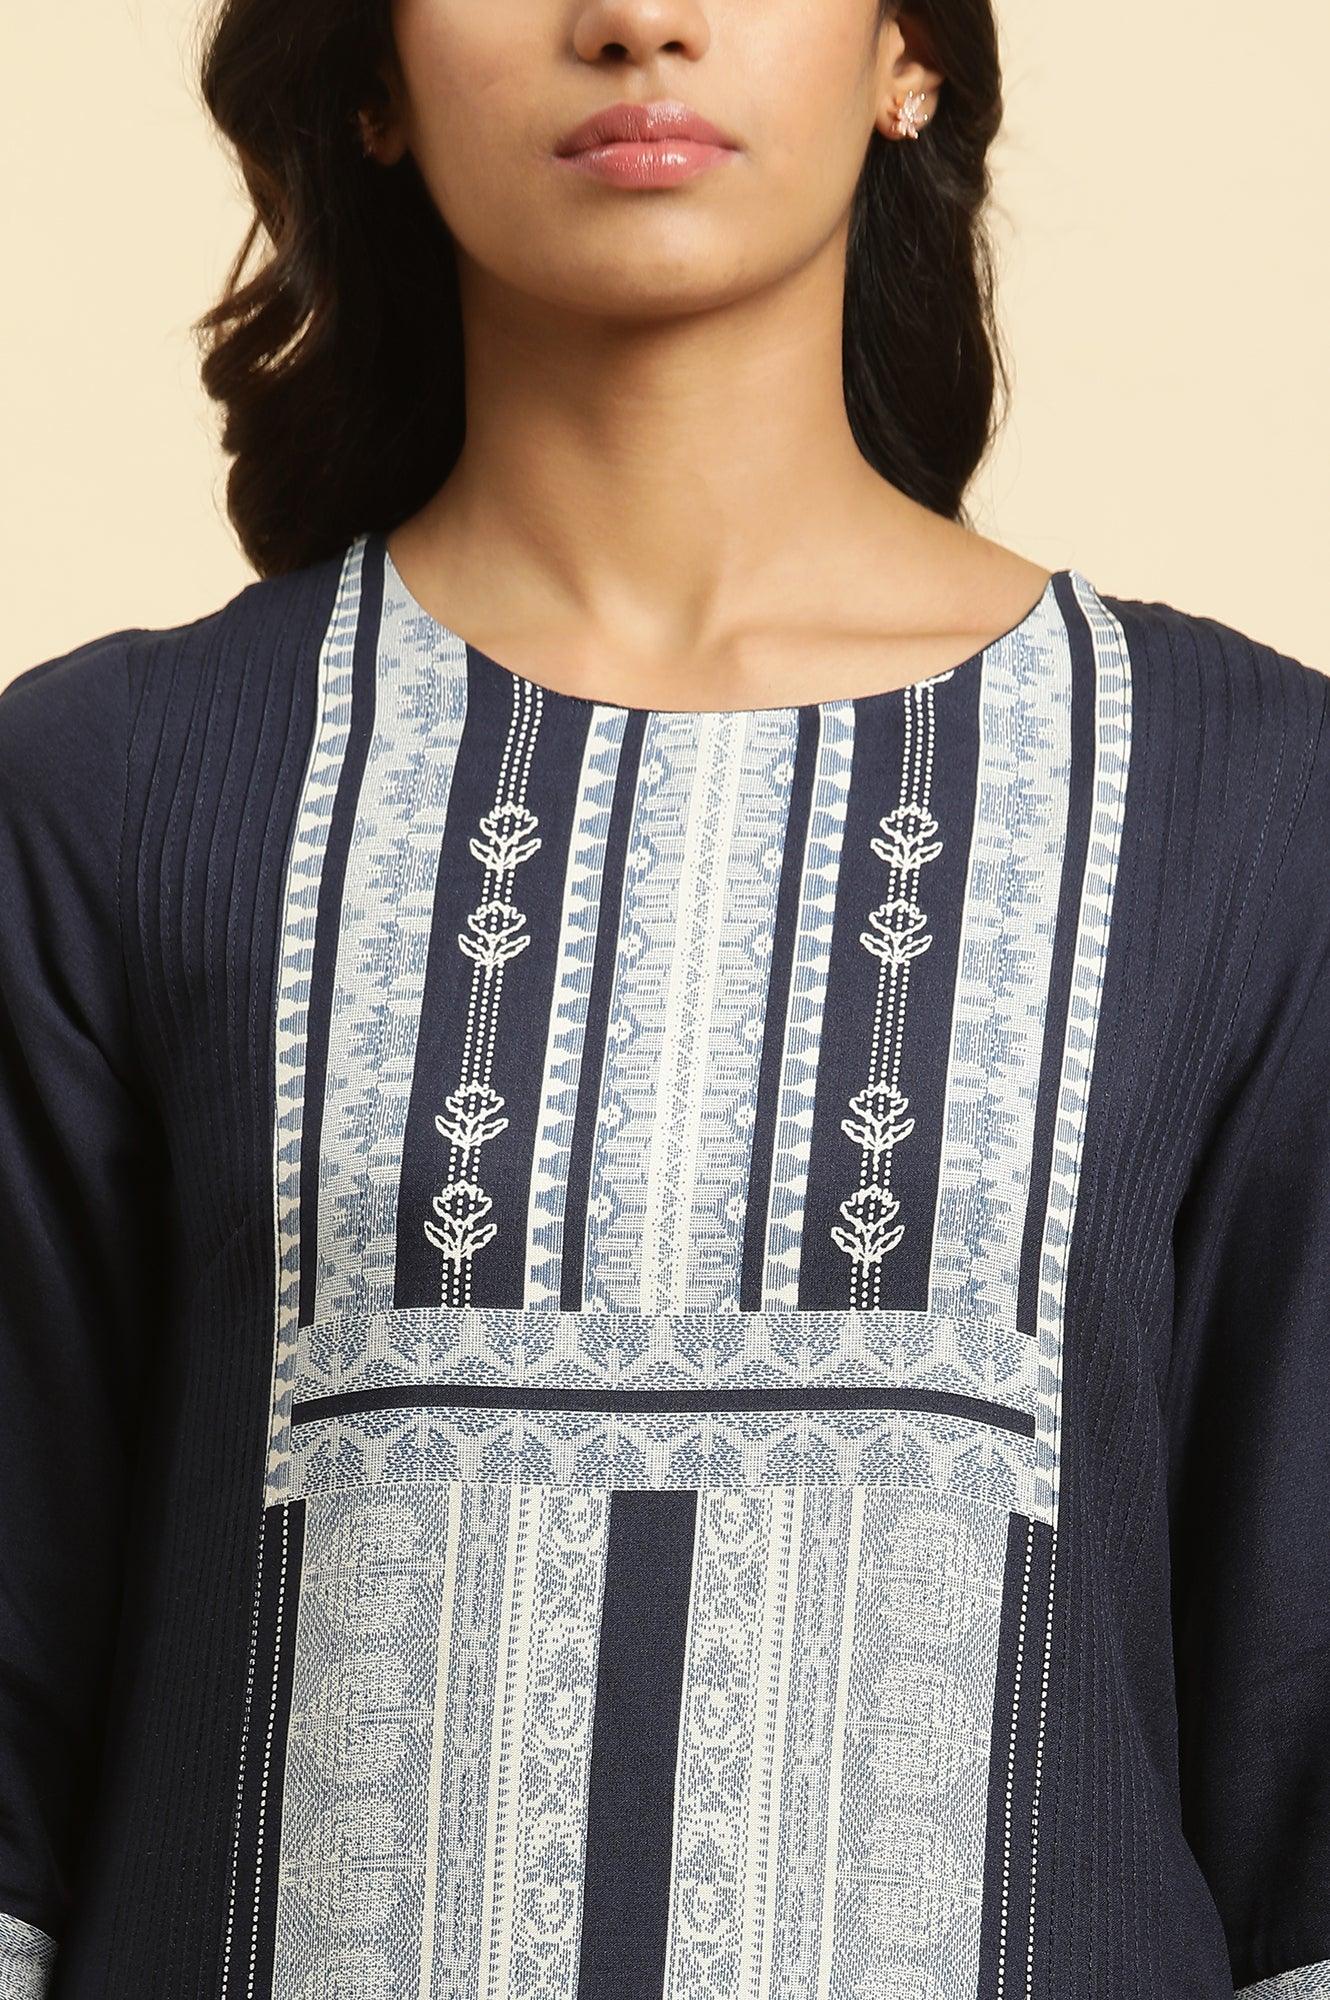 Blue Straight Kurta With Printed Front Panel - wforwoman